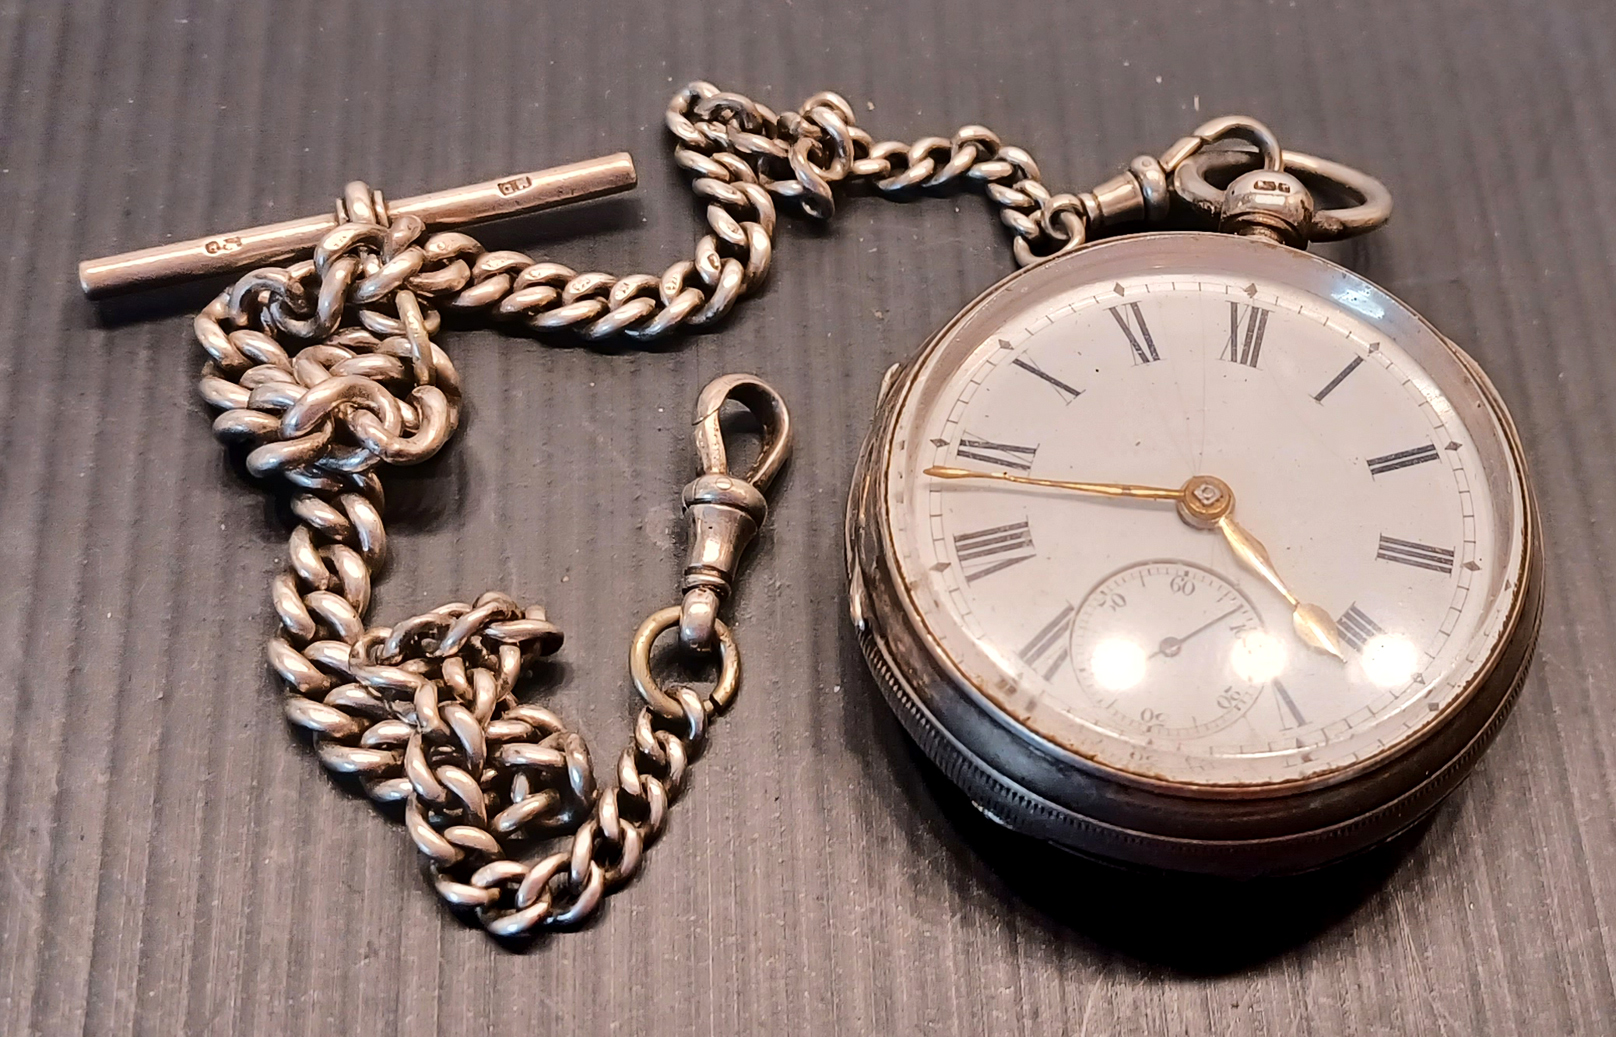 SILVER 1880 POCKET WATCH WITH AN ALBERT CHAIN 136g